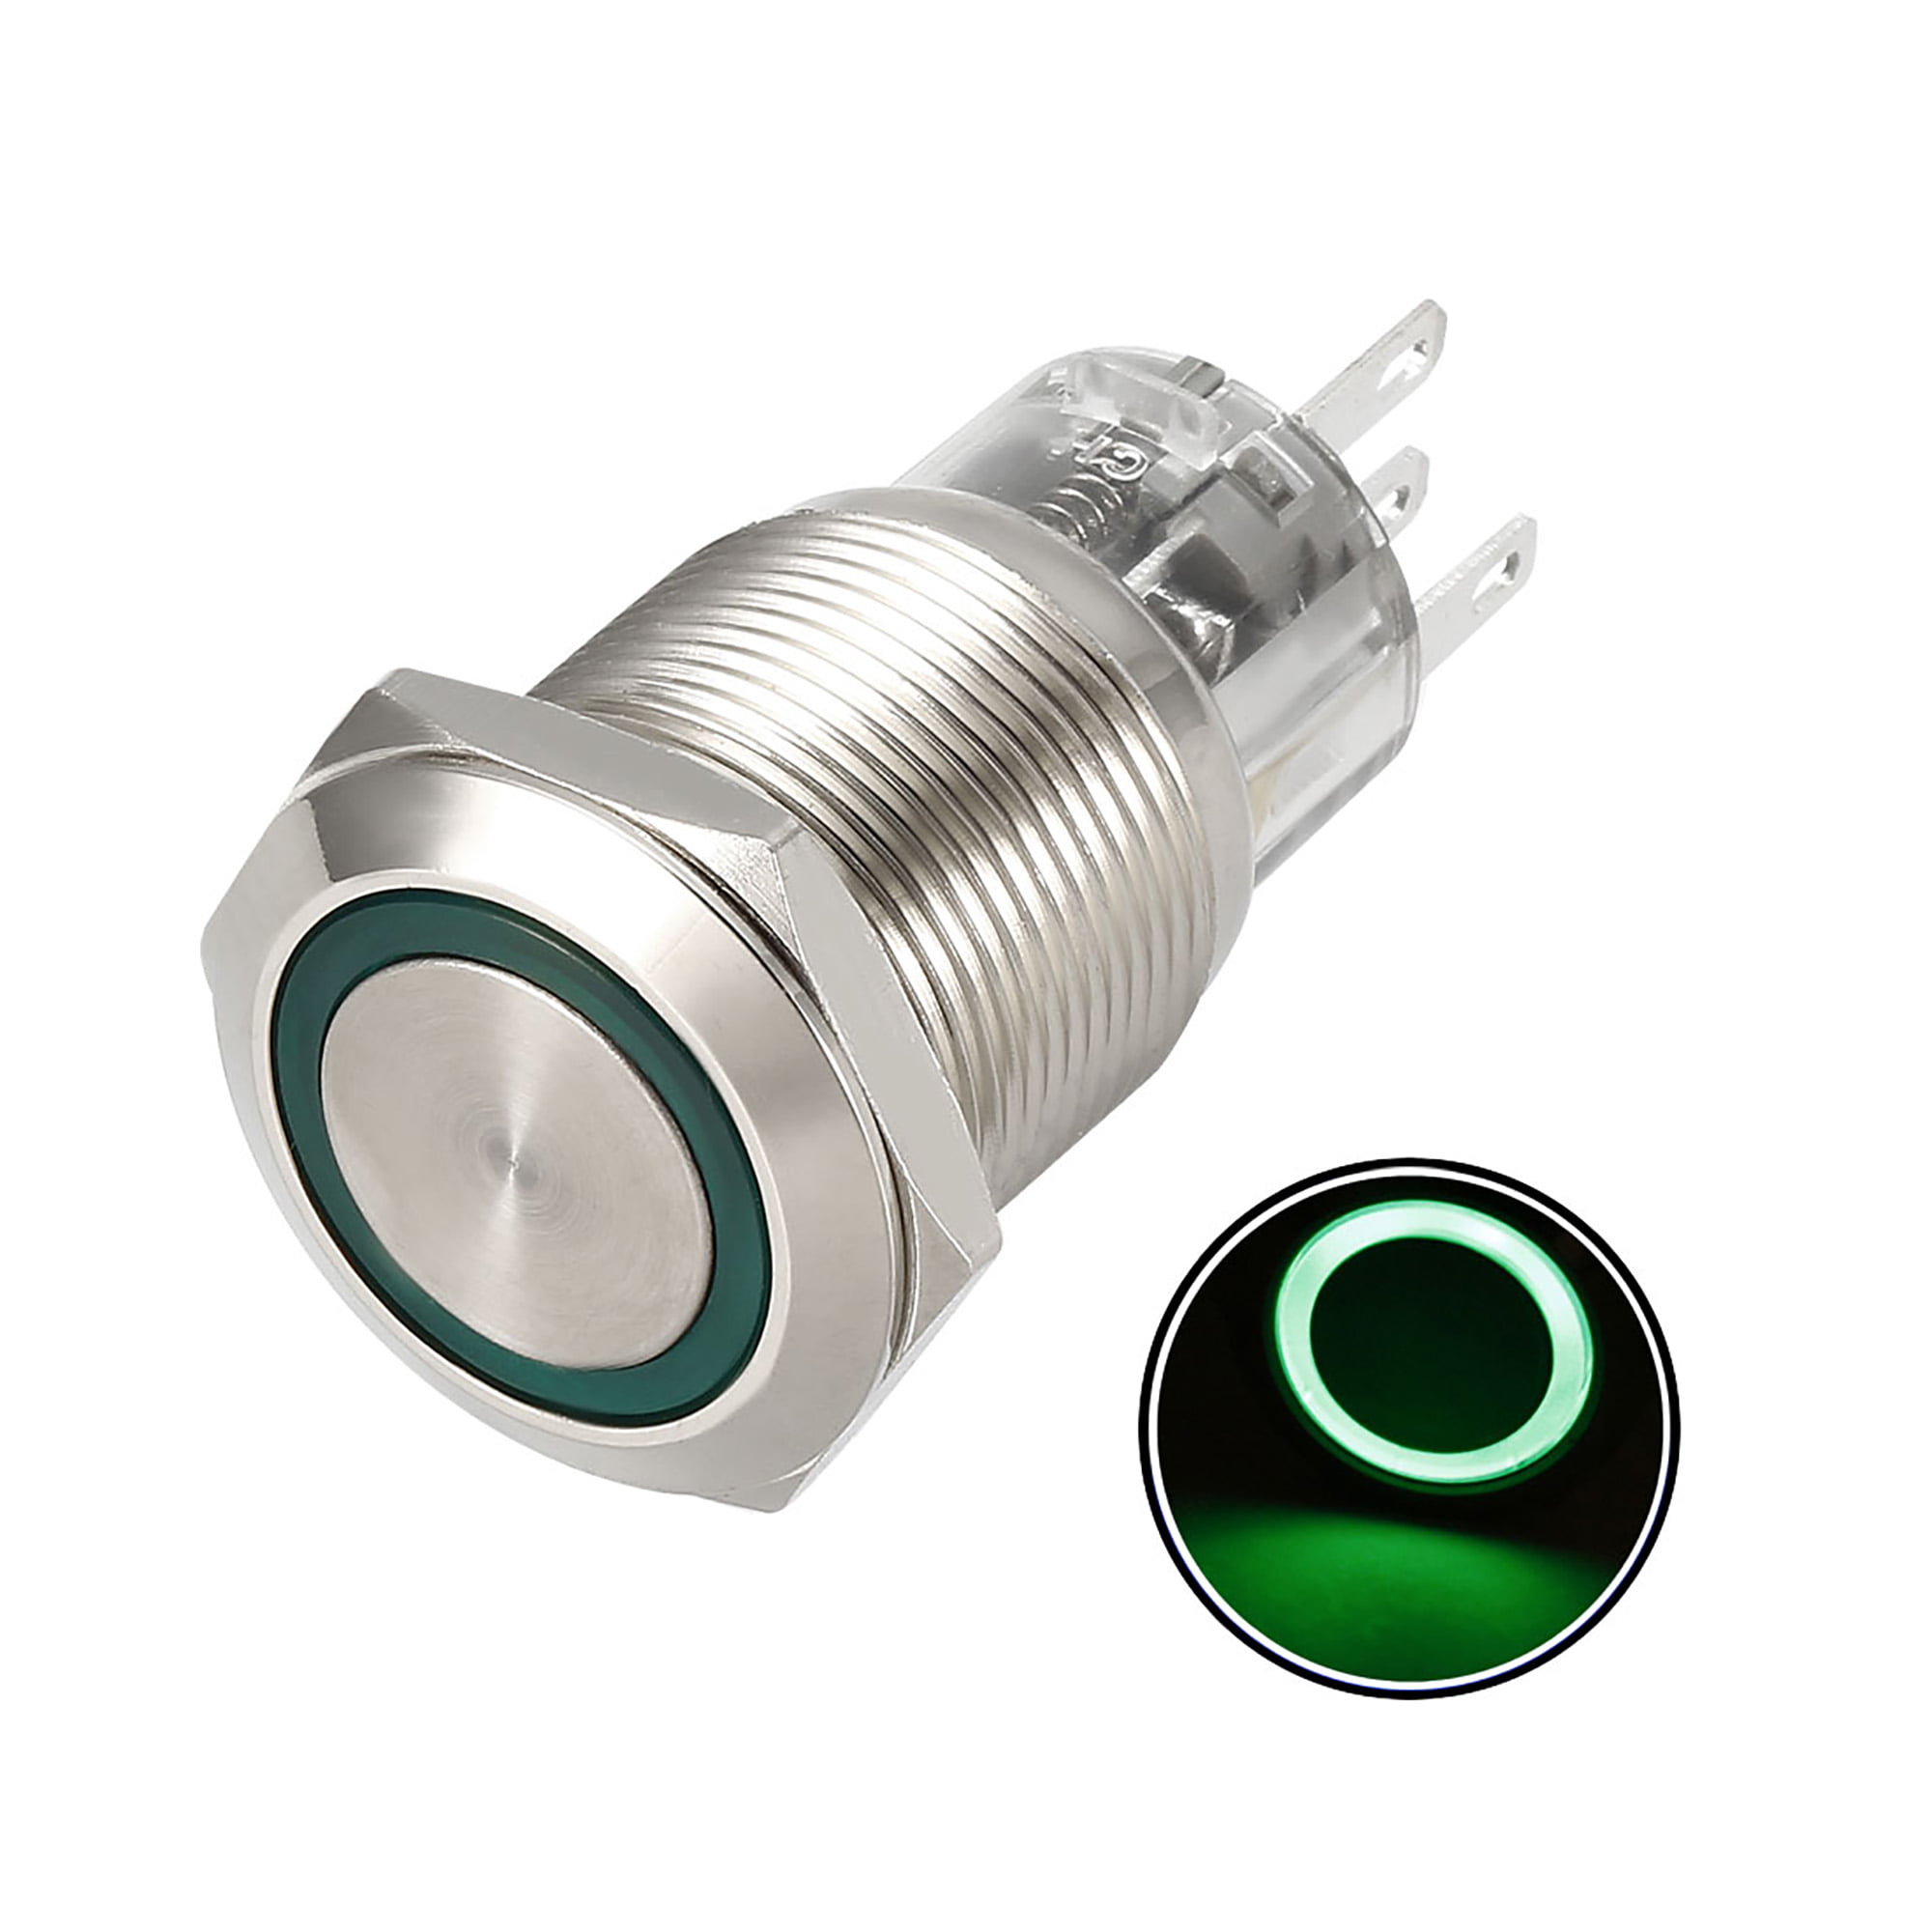 Details about   Latching Metal Push Button Switch 19mm Mounting 1NO 1NC 12V Green LED Light 1pcs 